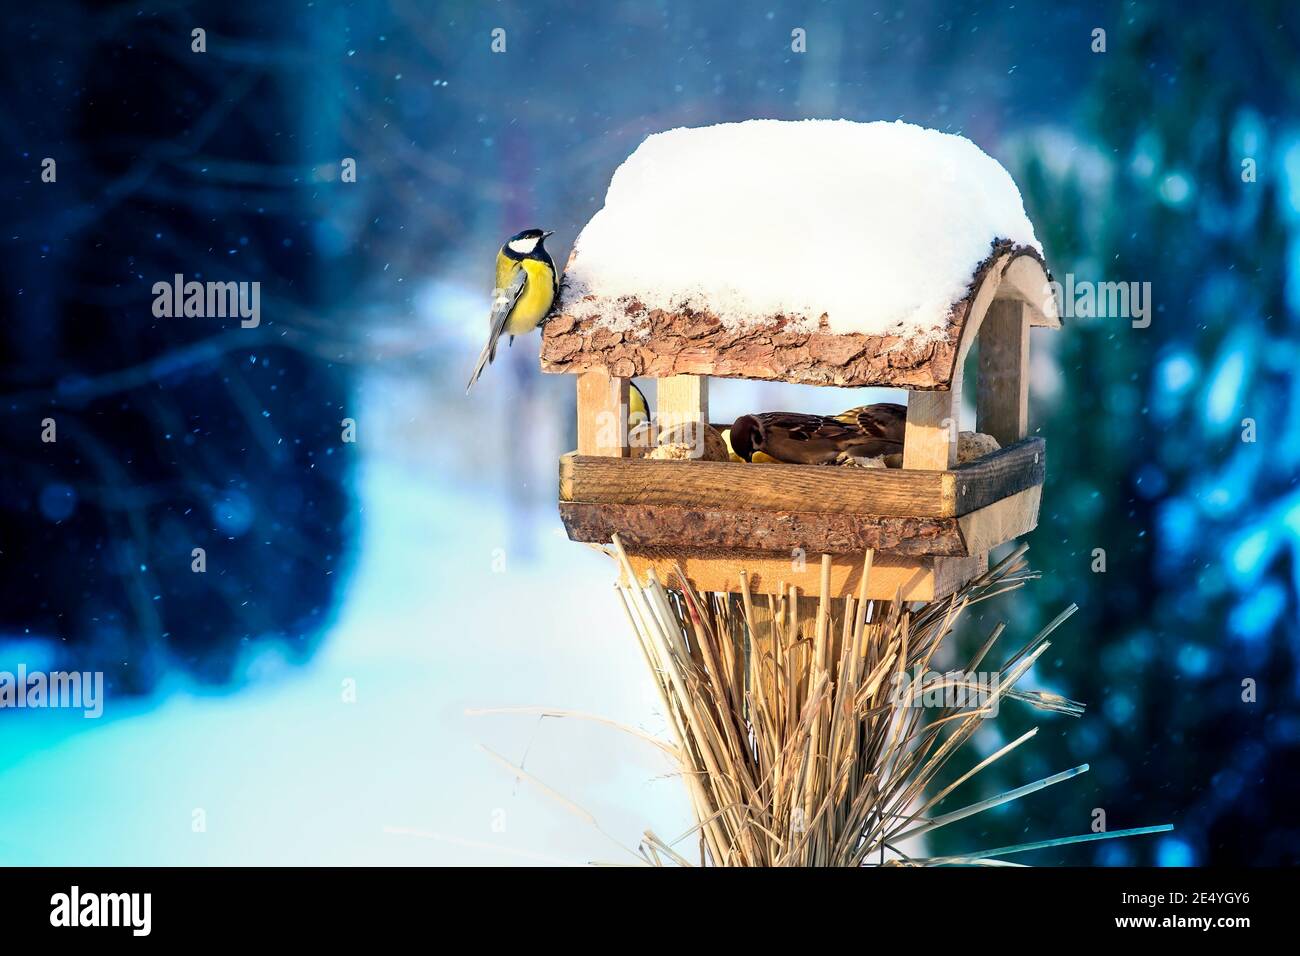 Great tit bird sitting in wooden bird feeder covered with snow on blue blurred background in winter Stock Photo